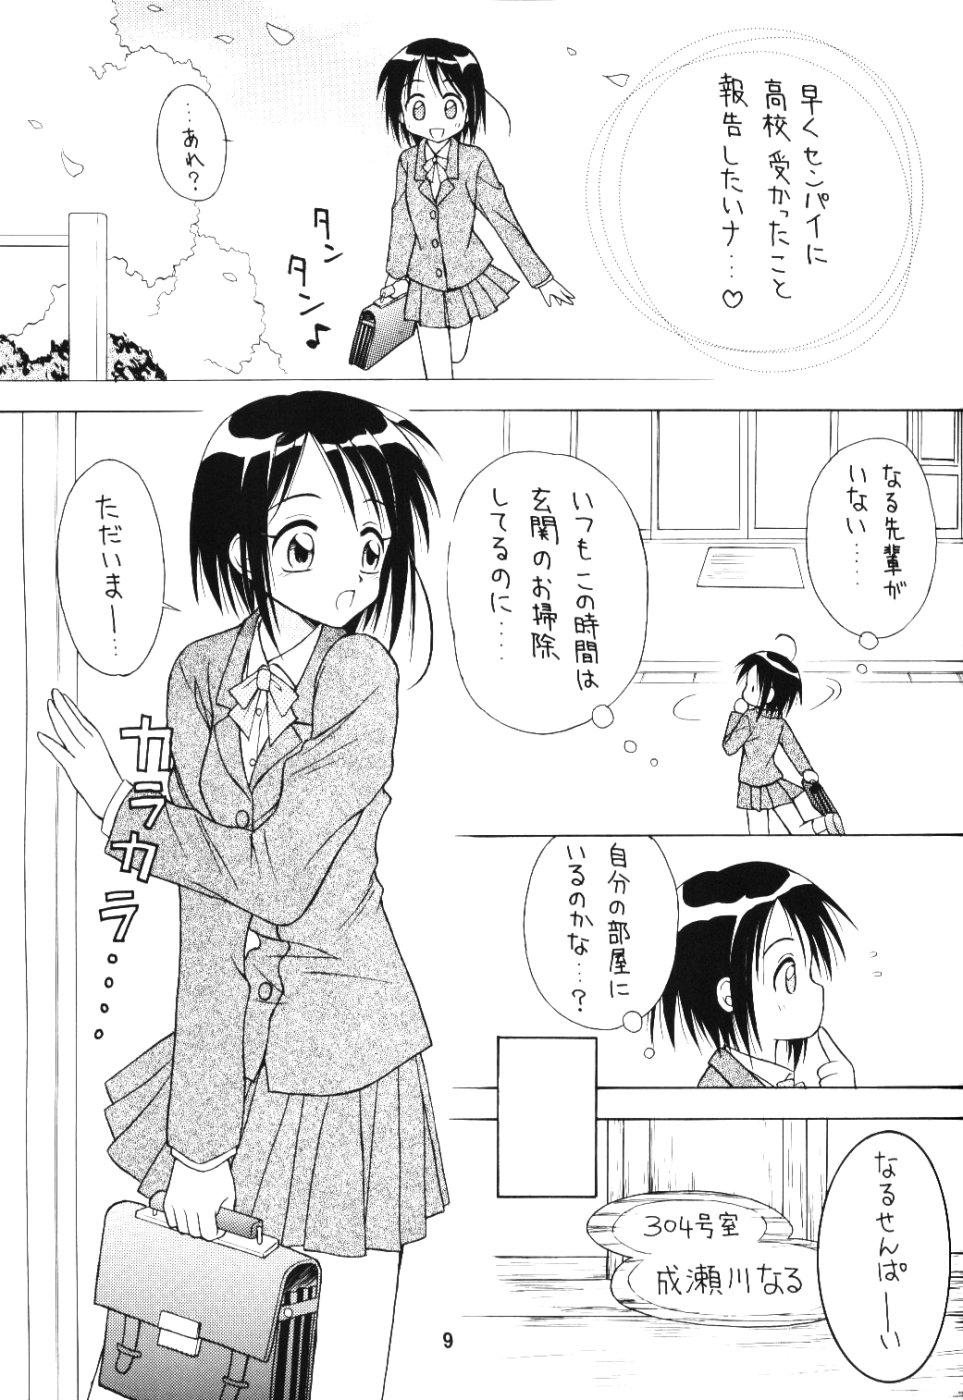 Sislovesme Lovely 4 - Love hina Russia - Page 8